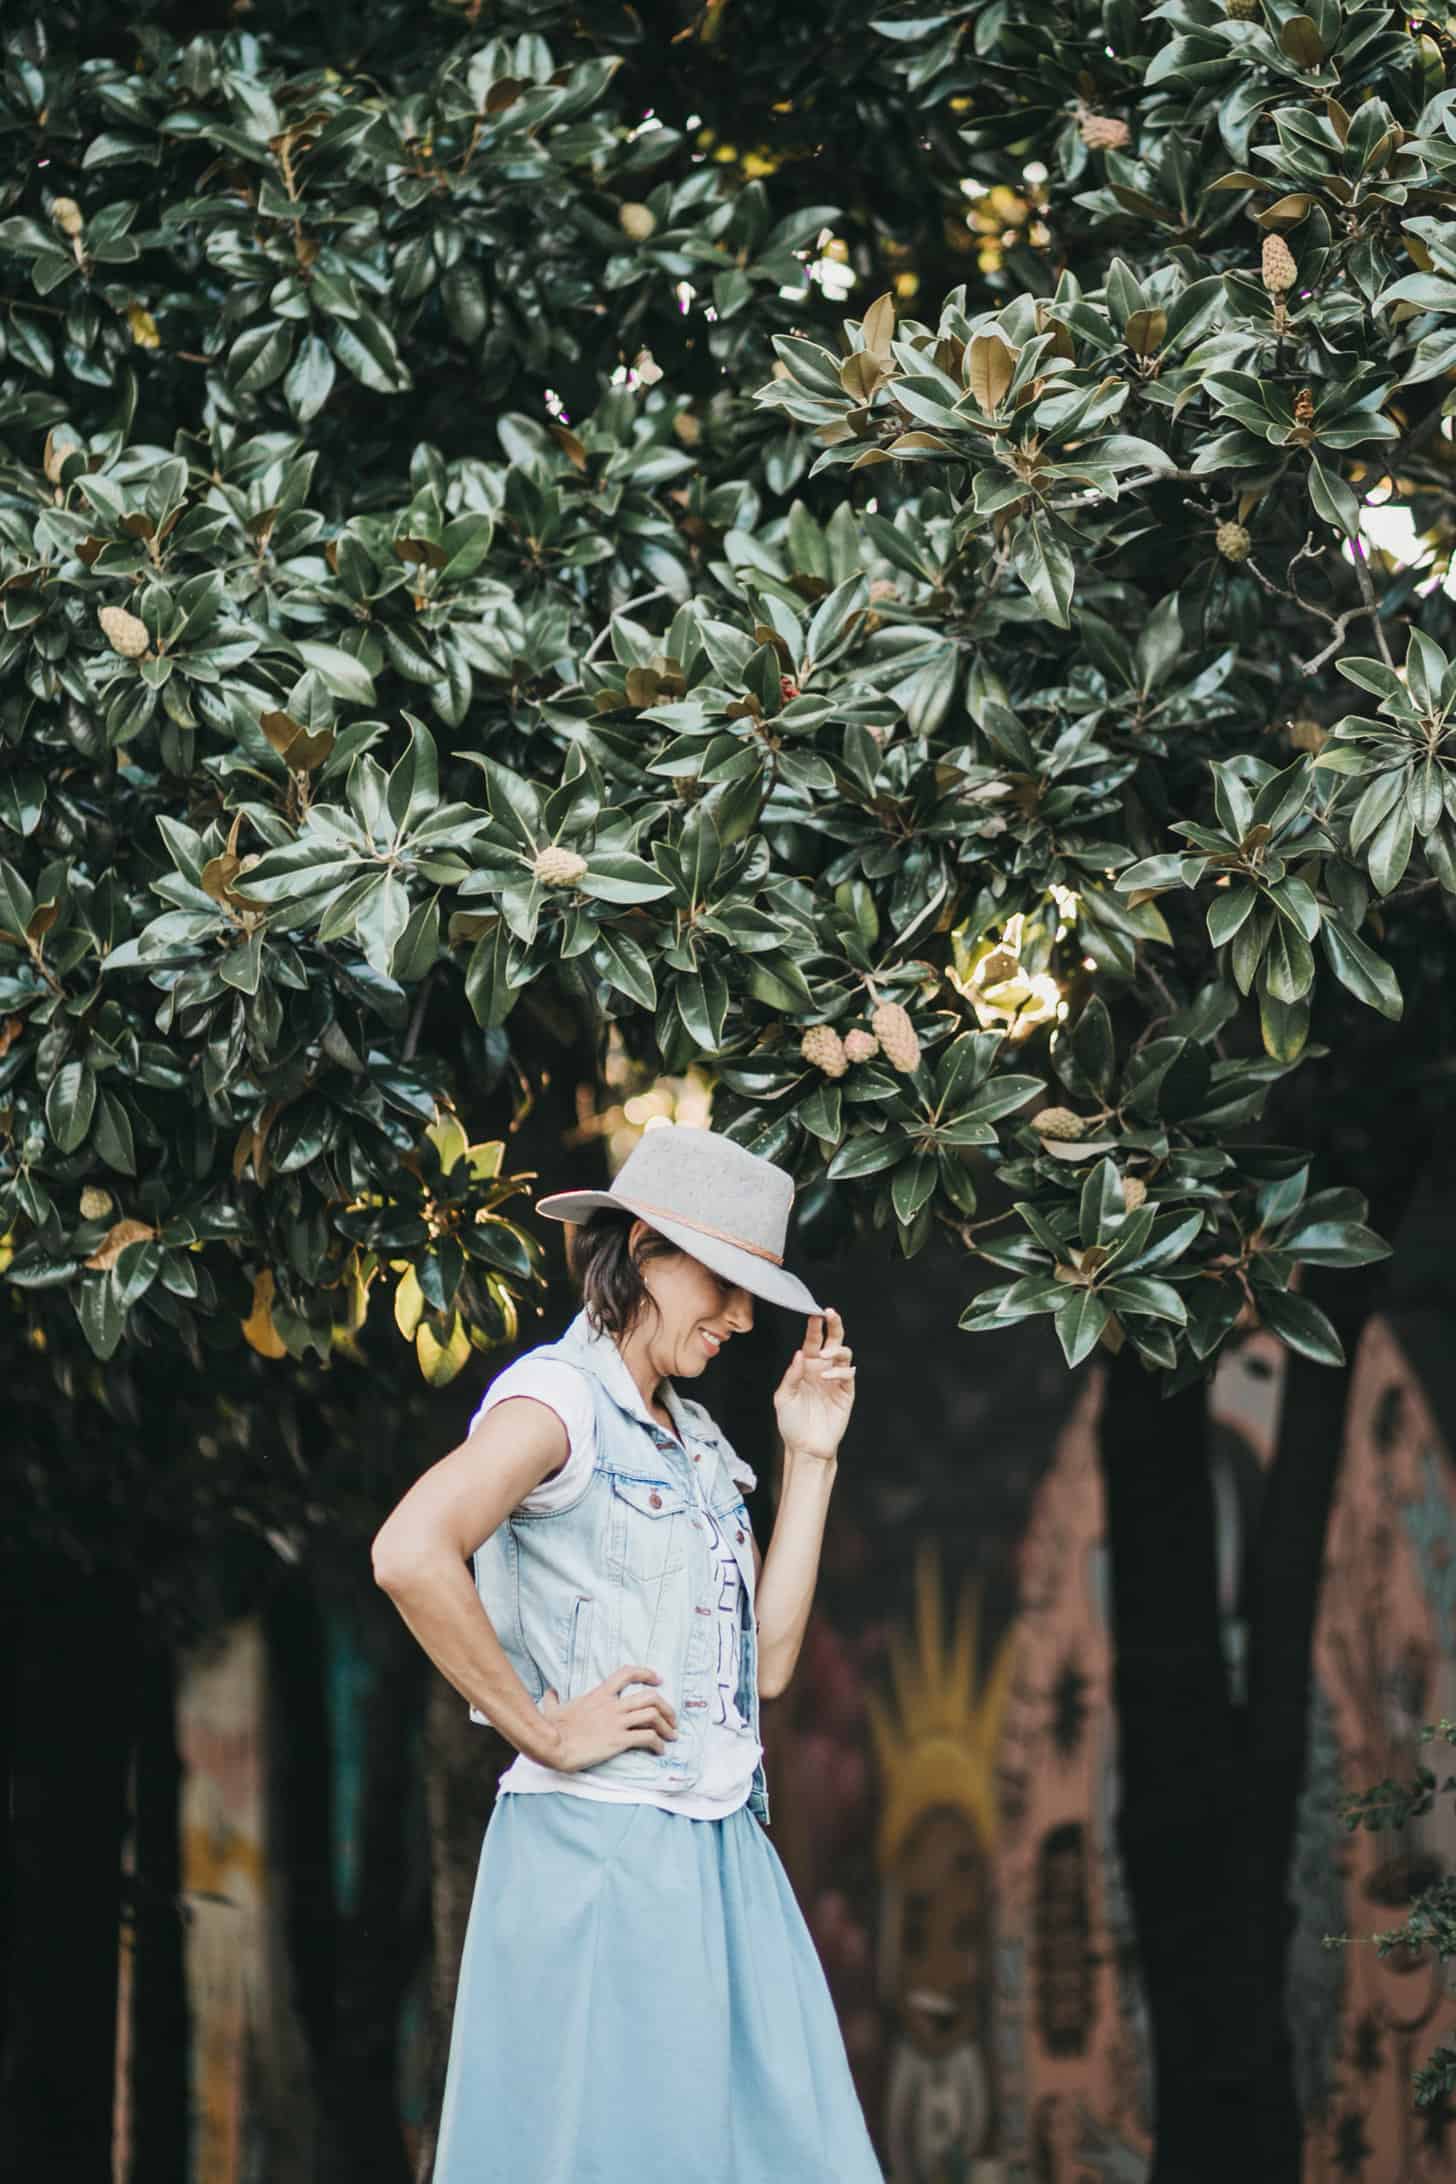 a woman wearing a hat stands amidst some trees